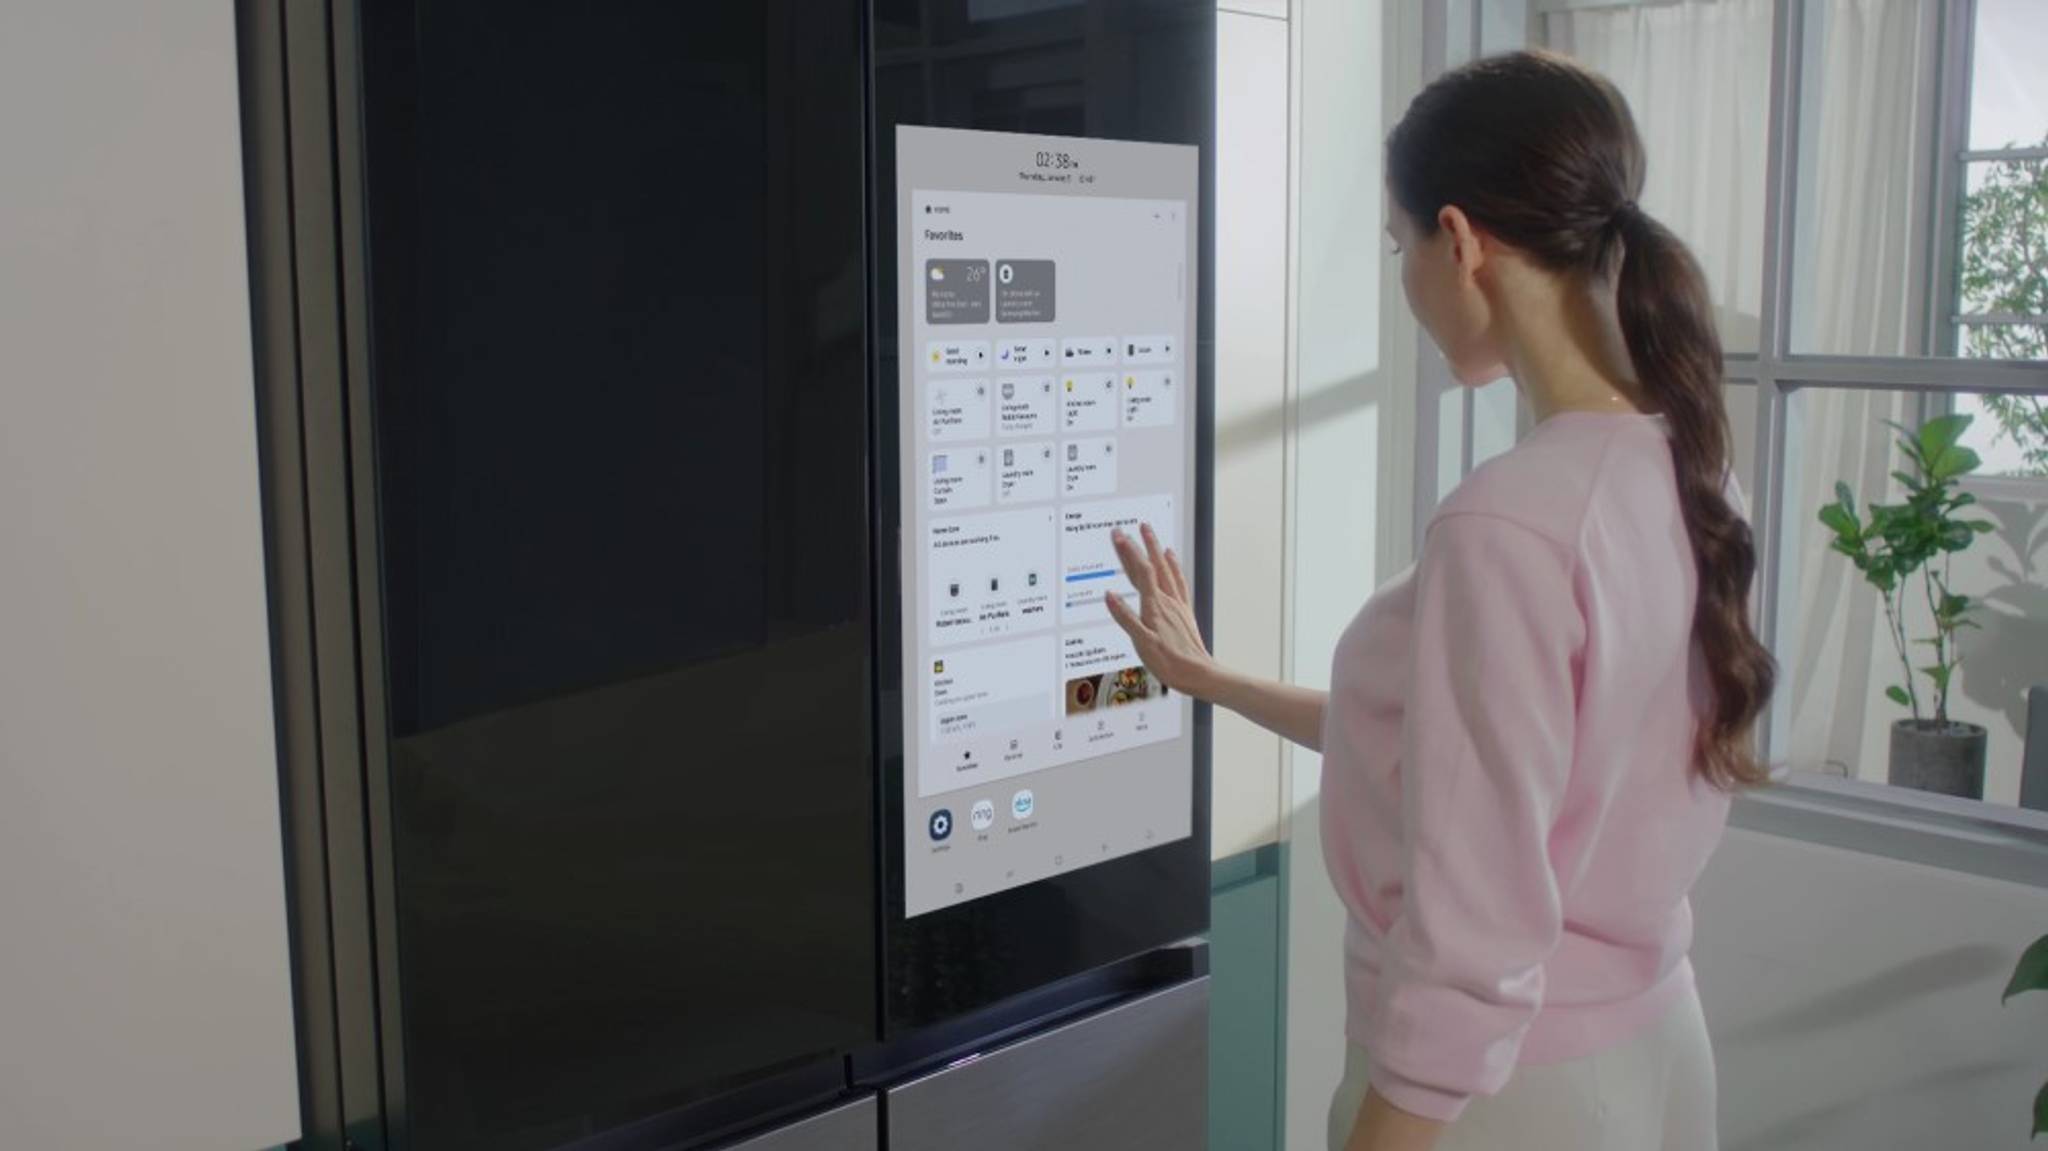 Samsung oven looks to advance home AI ecosystems